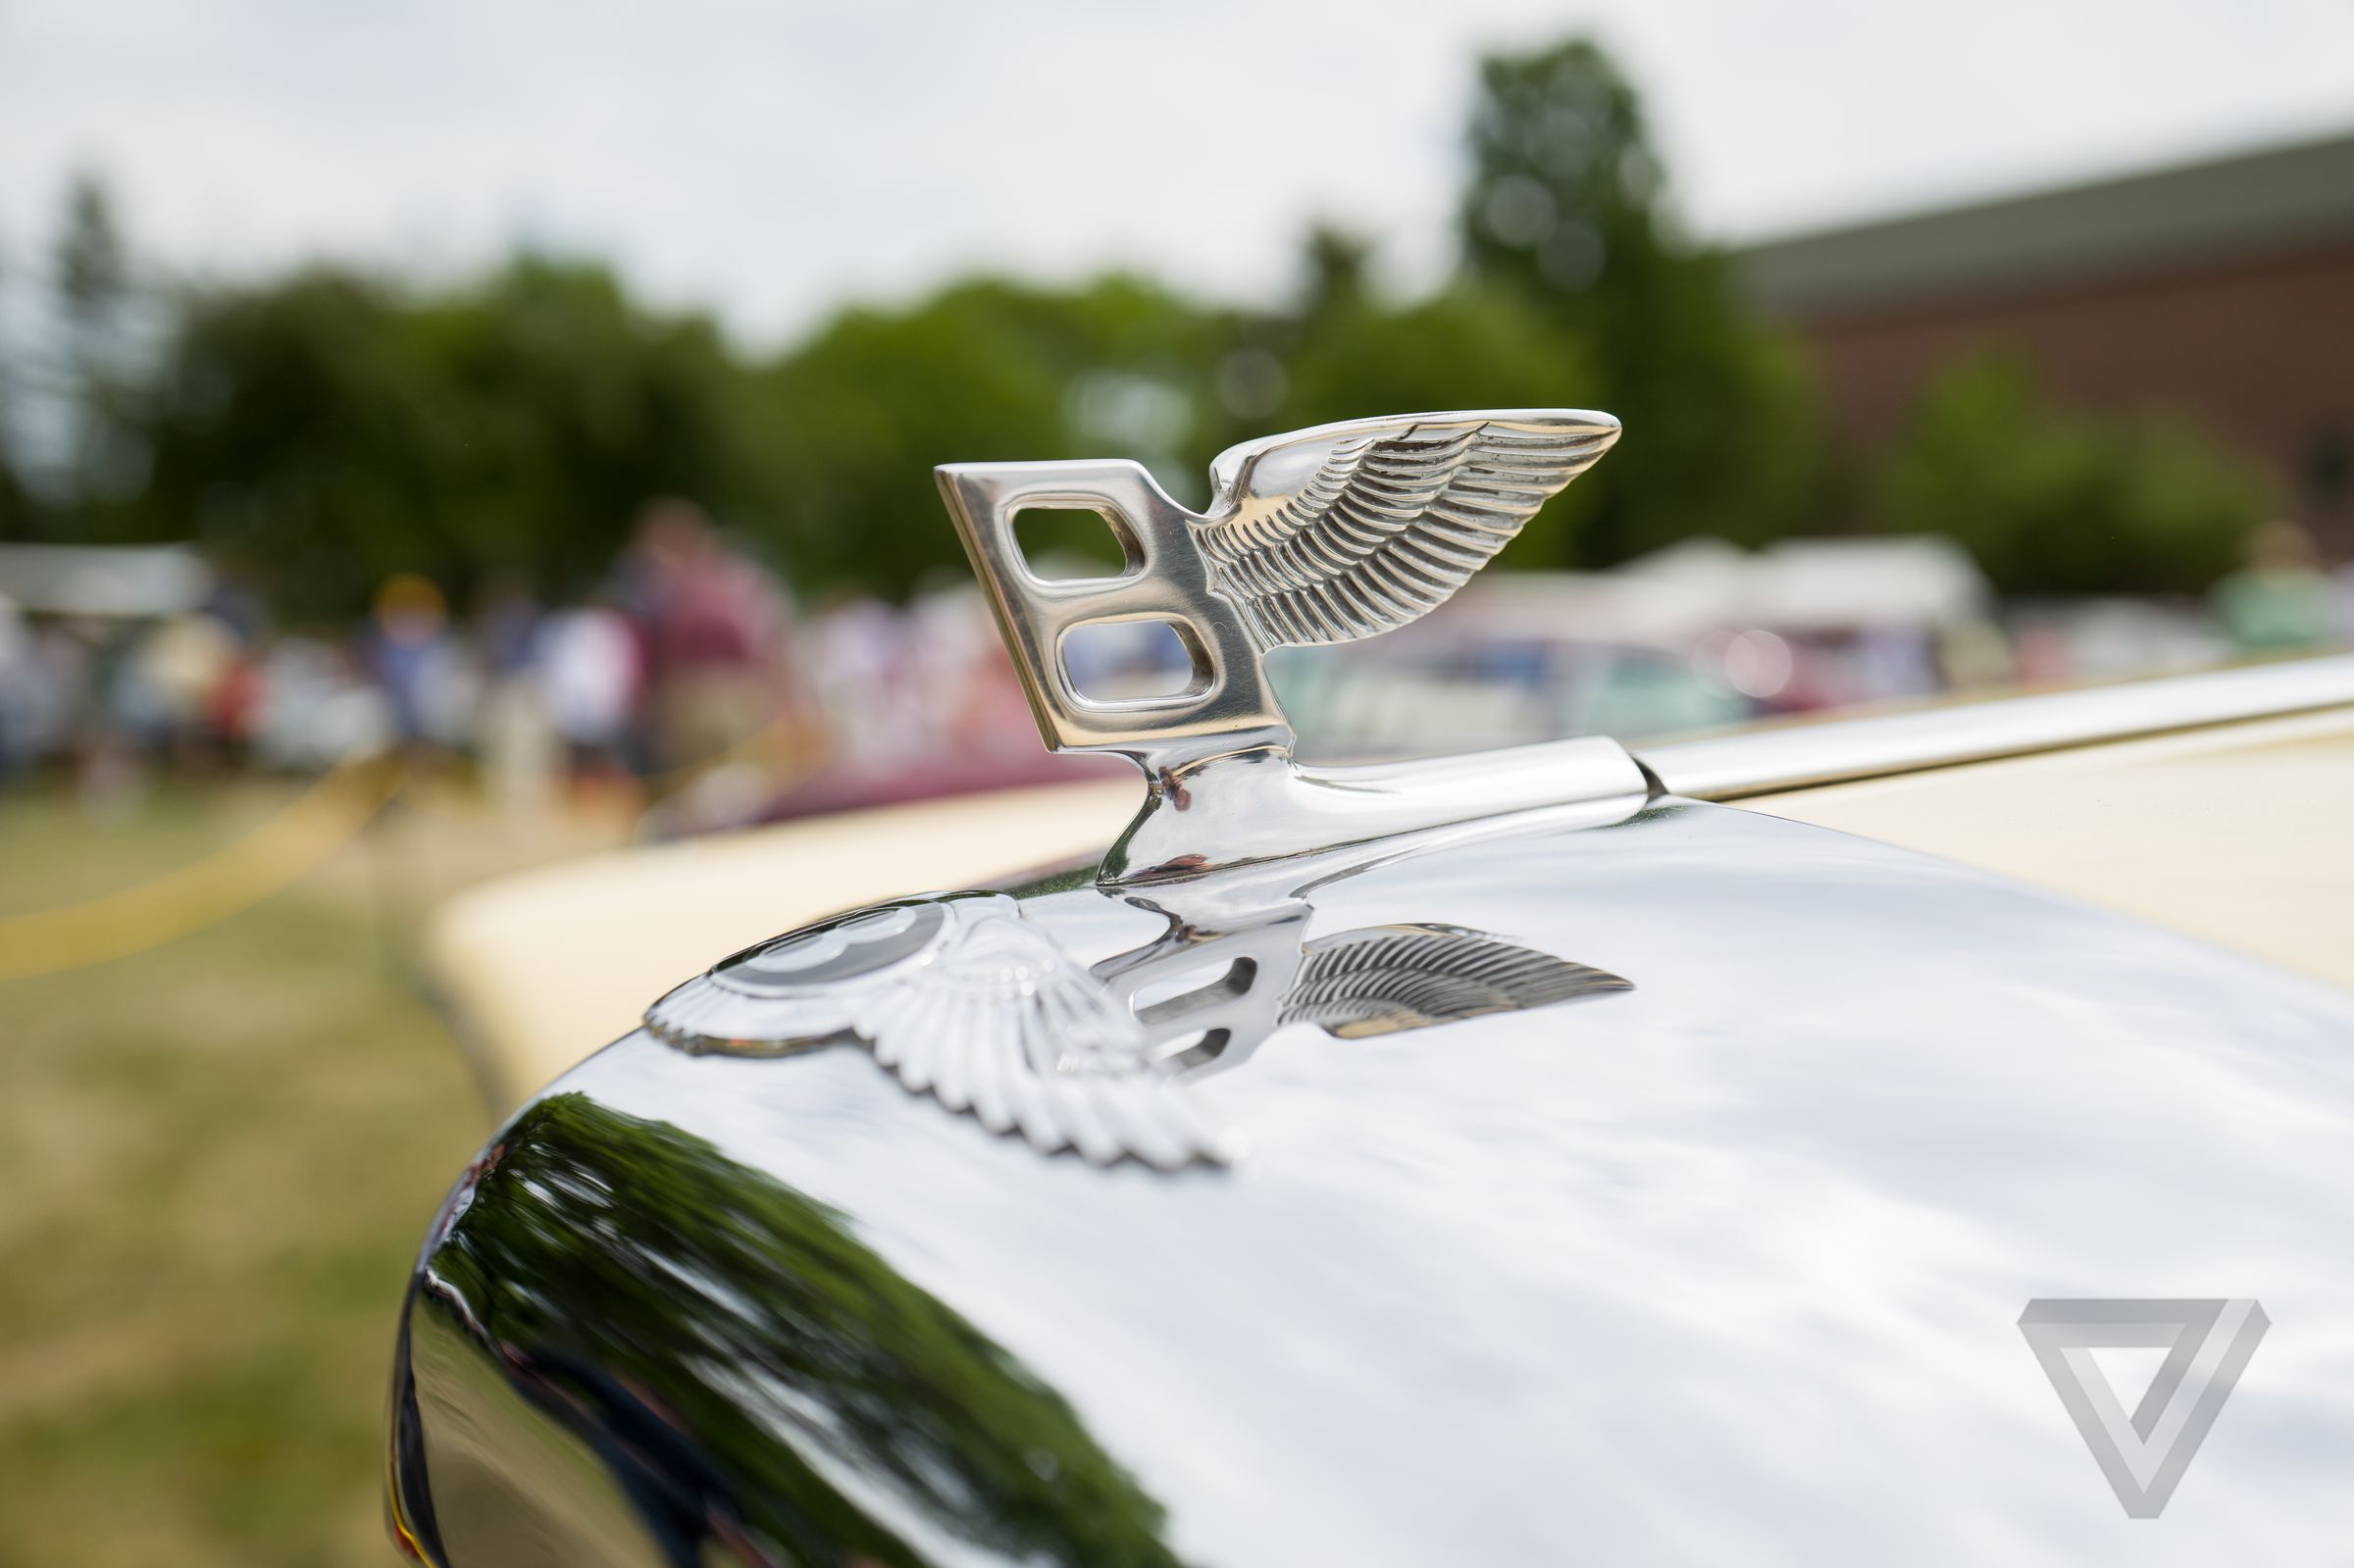 Using the Leica Q at the Greenwich Concours d'Elegance